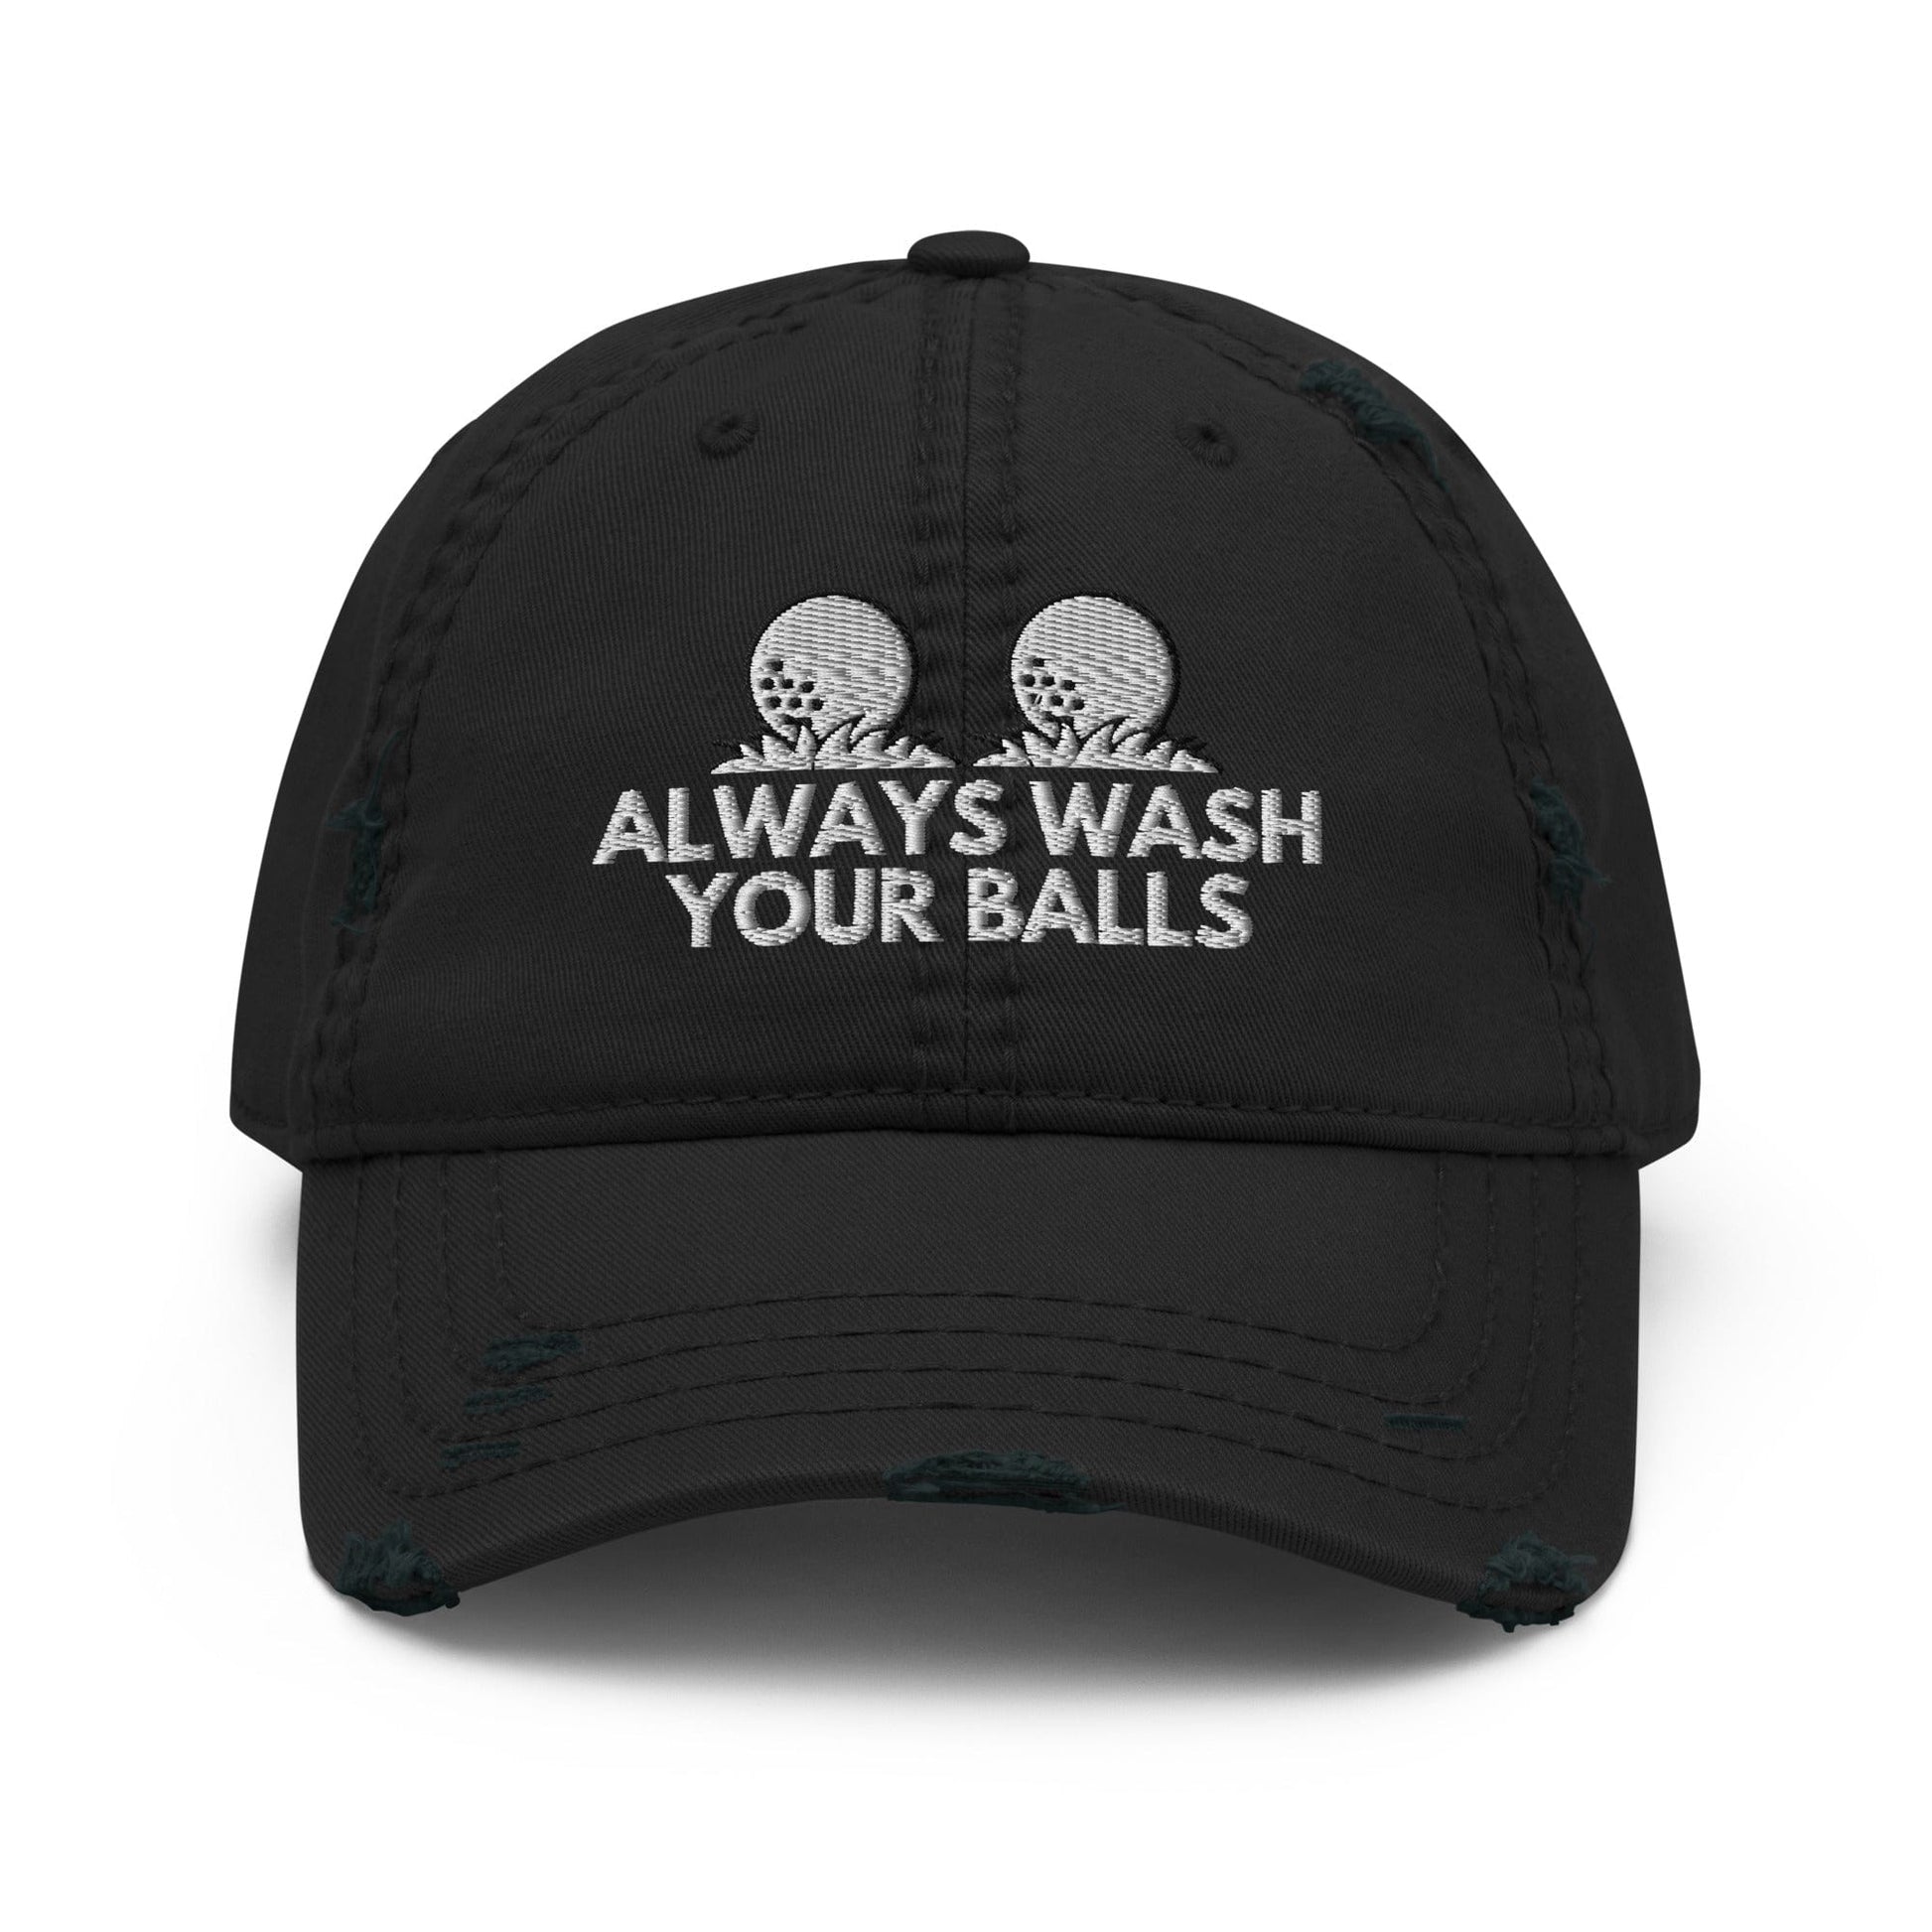 Funny Golfer Gifts  Distressed Cap Black Always Wash Your Balls Hat Distressed Hat